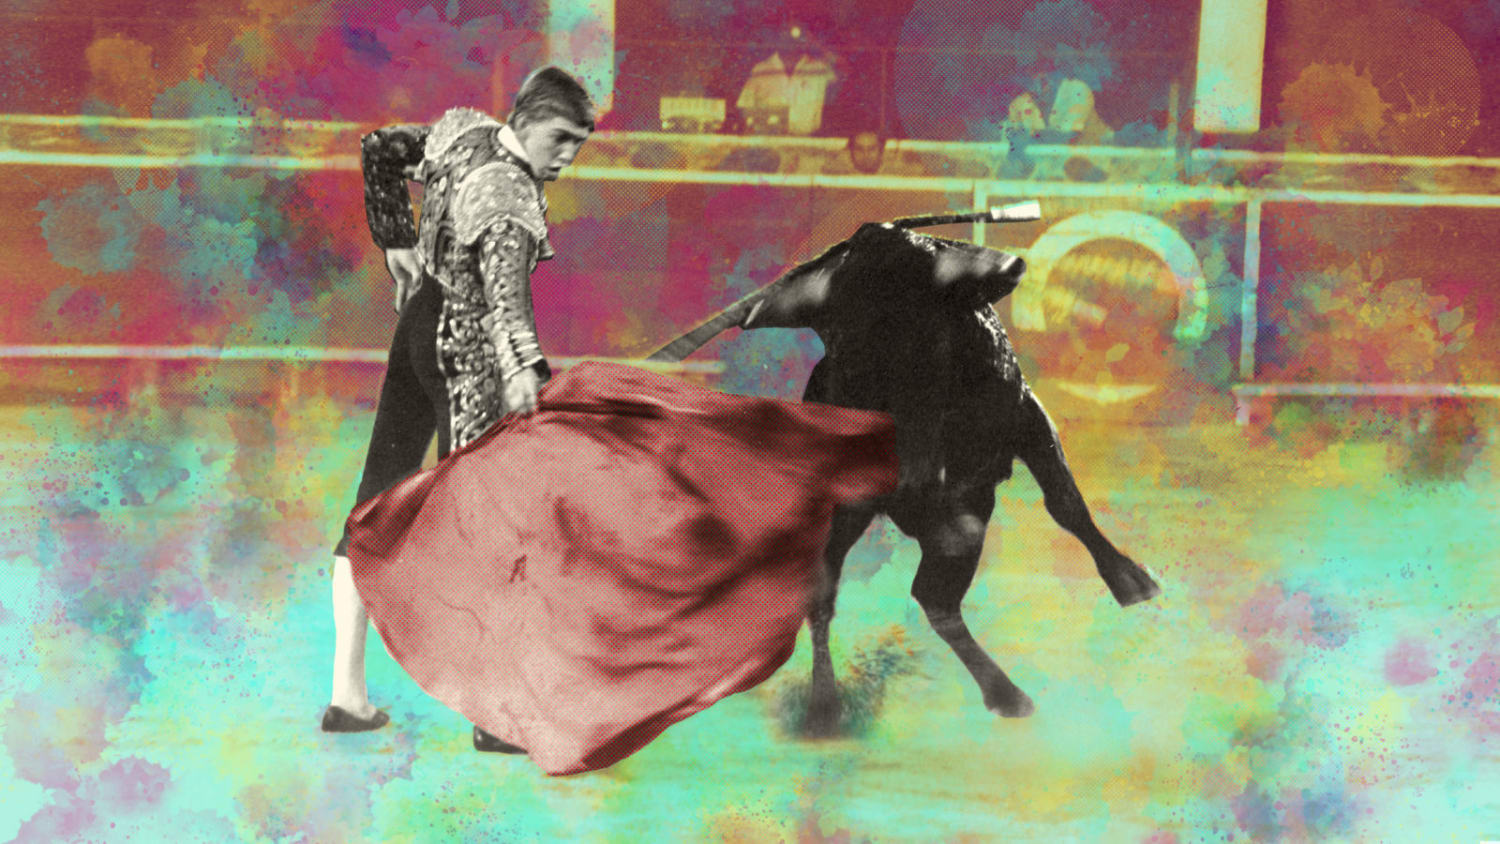 The First and Final King of Bloodless Bullfighting